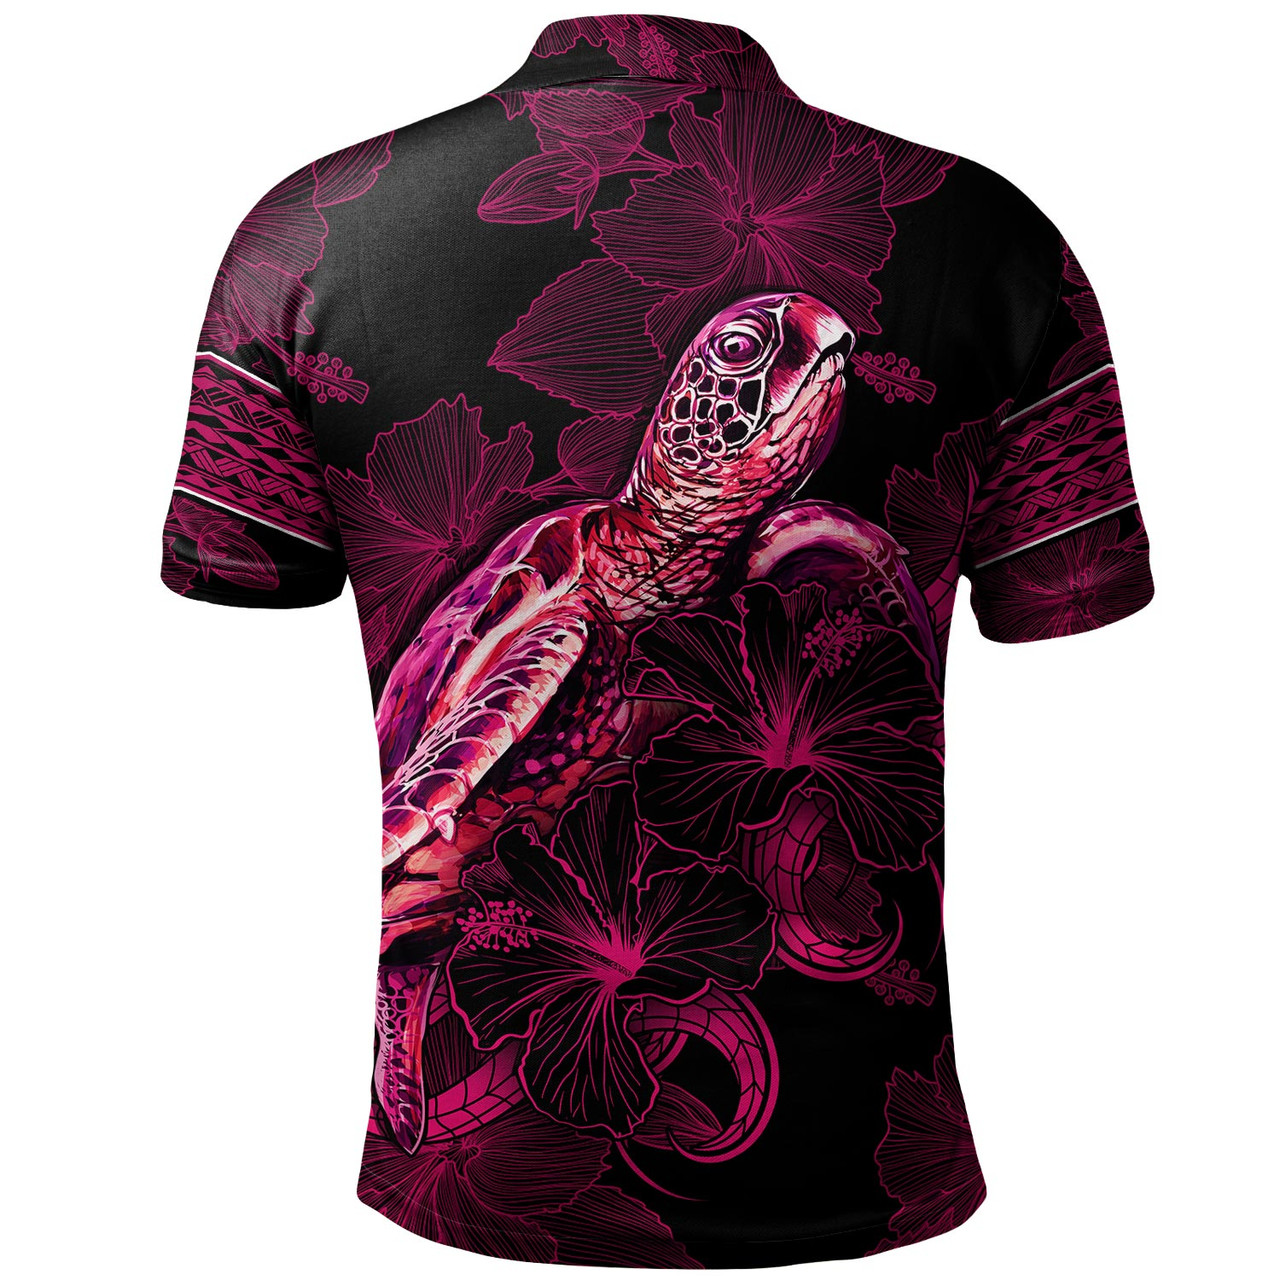 Yap State Polo Shirt Sea Turtle With Blooming Hibiscus Flowers Tribal Maroon